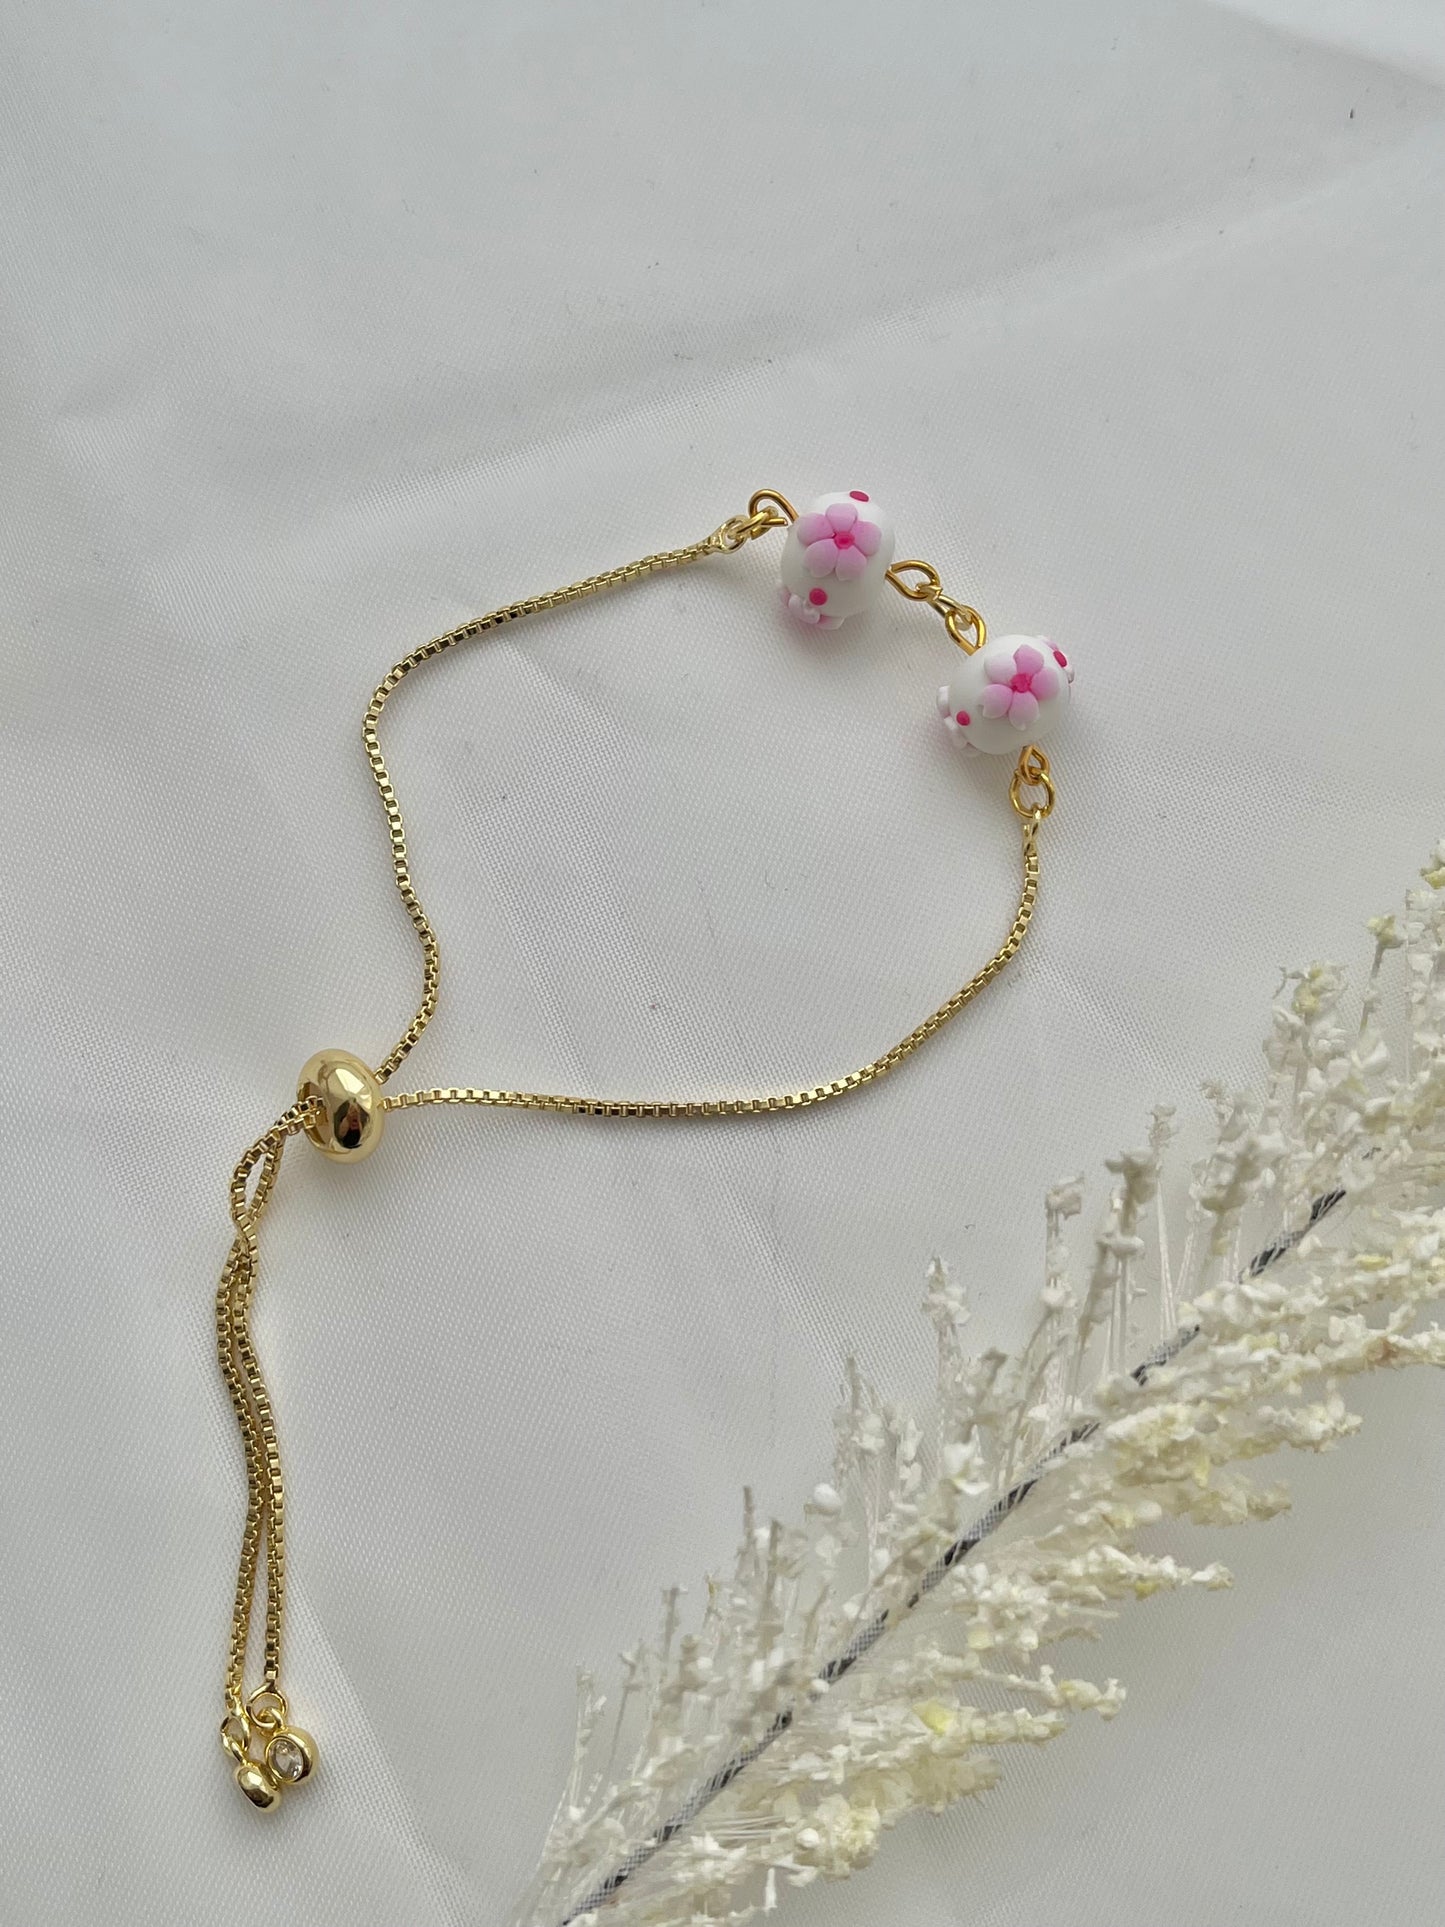 A floral bracelet in cherry blossom style laid flat to show the adjustable slider